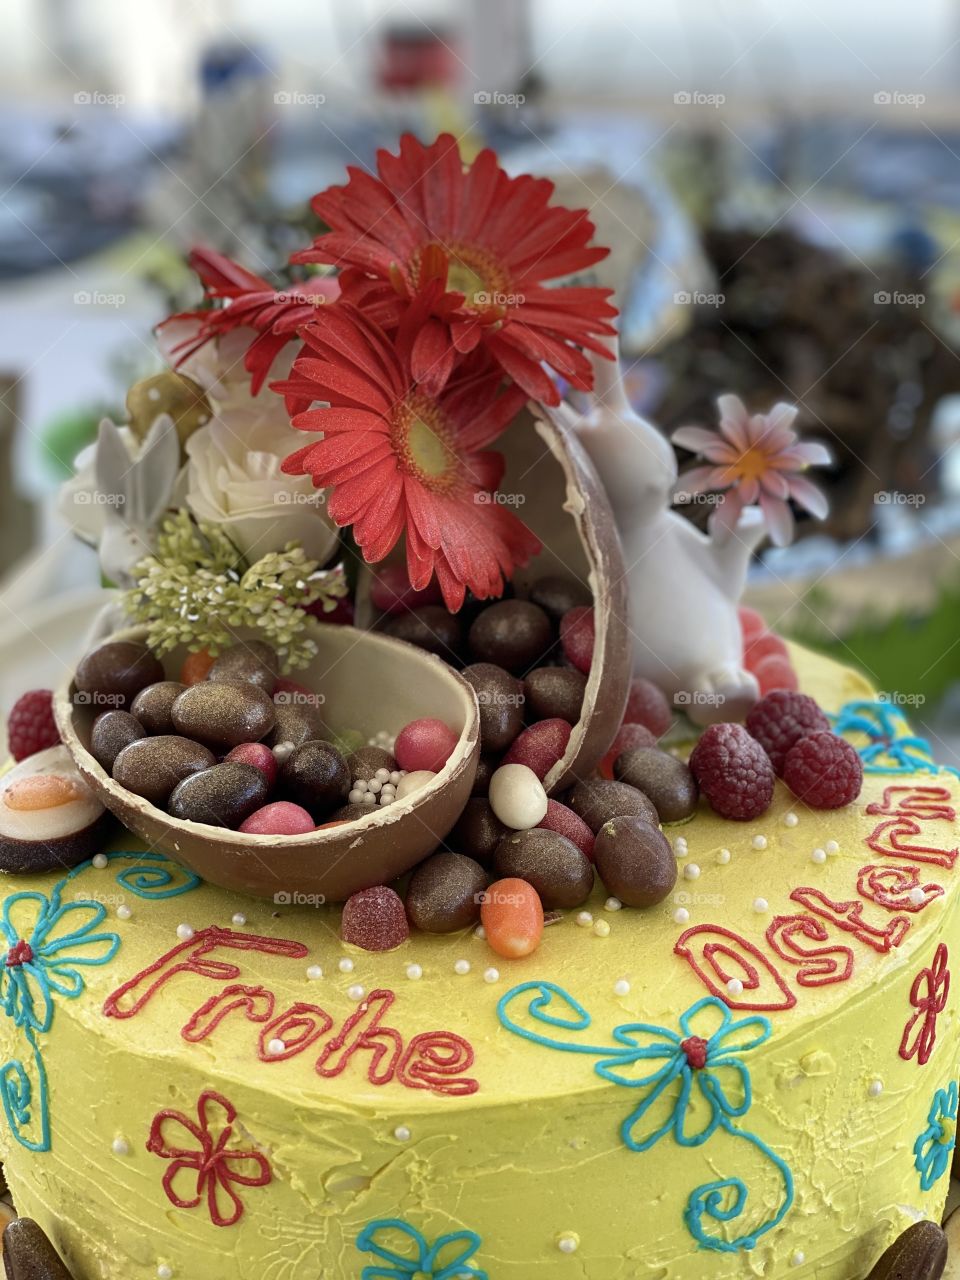 birthday cake for Easter, eggs, sweets, chocolate, flowers, decorated table for the holiday